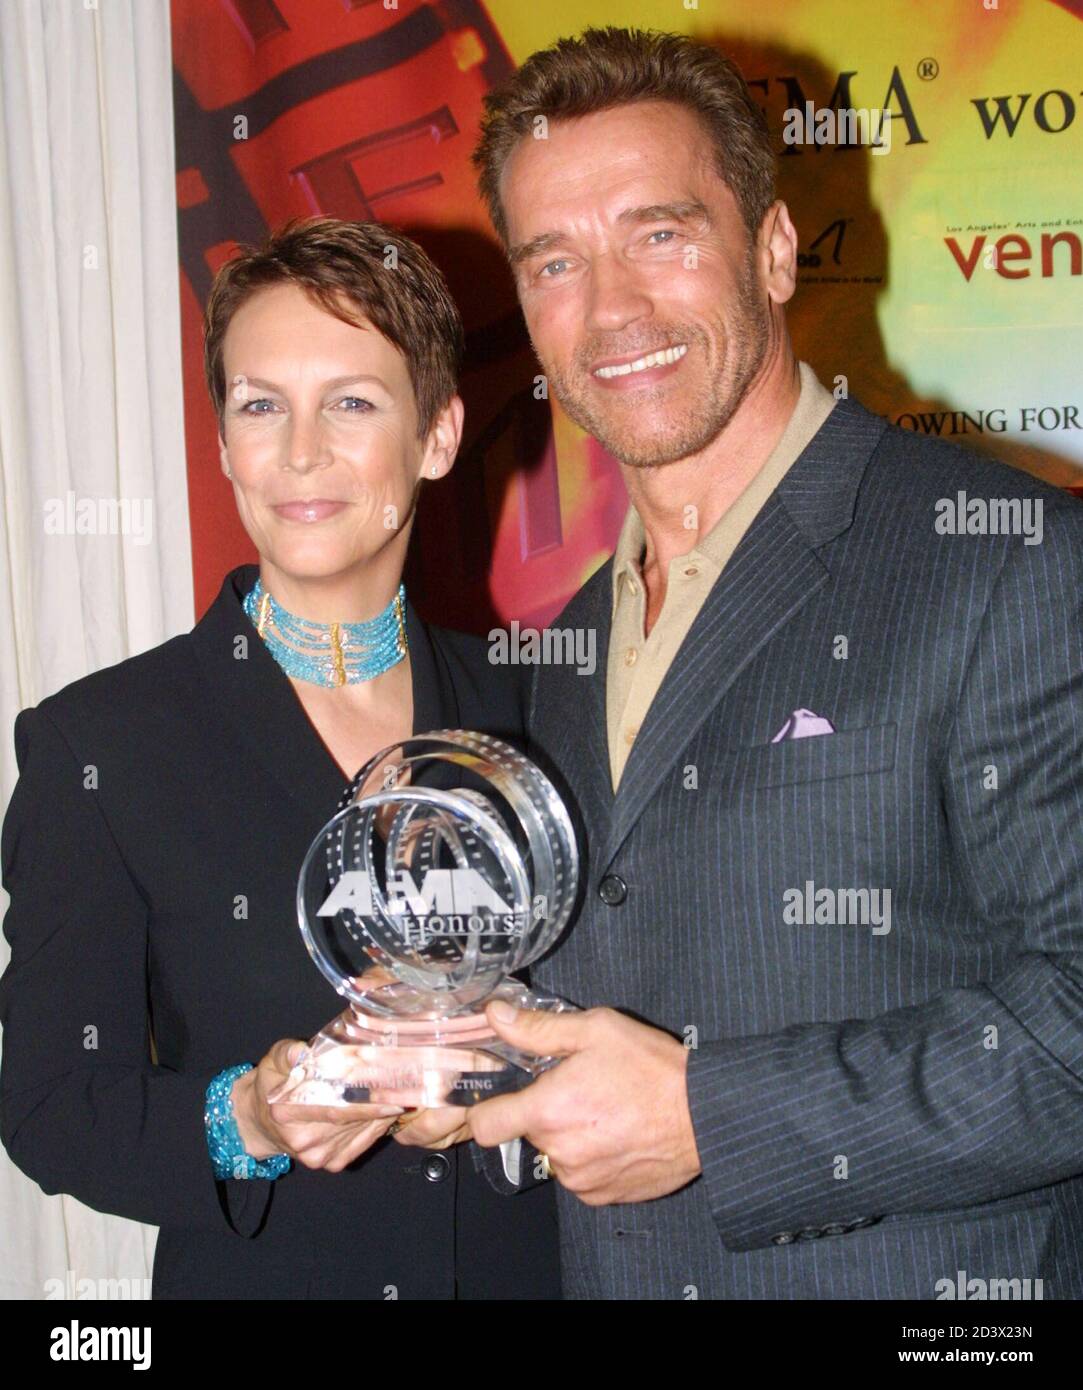 Actress Jamie Lee Curtis presents Arnold Schwarzenegger with an achievement  award during the American Film Marketing